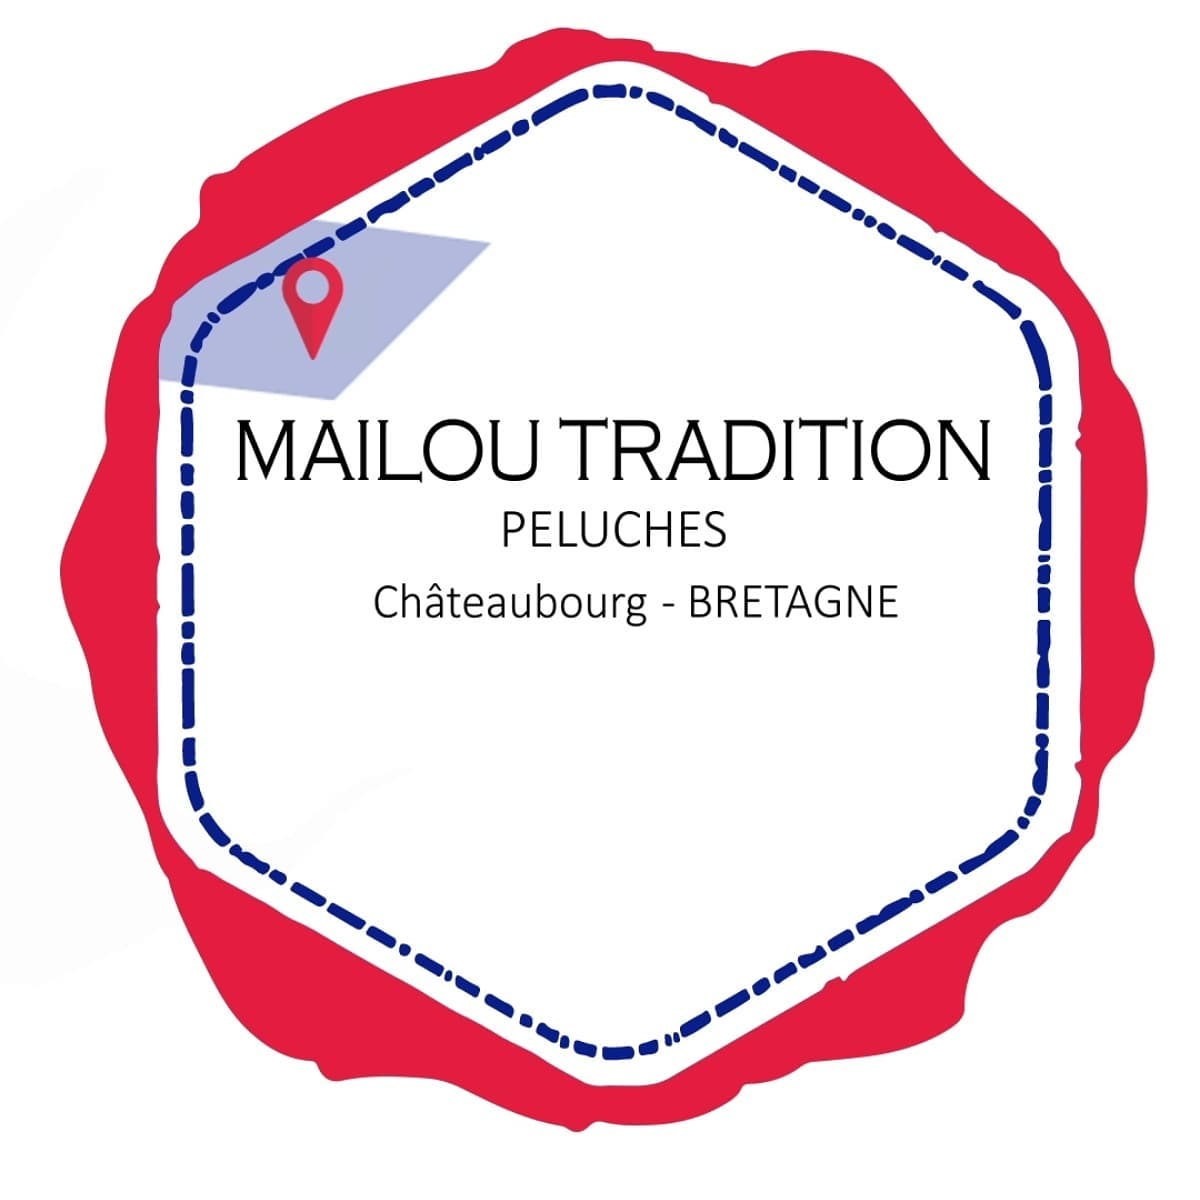 MAILOU TRADITION, peluches made in France